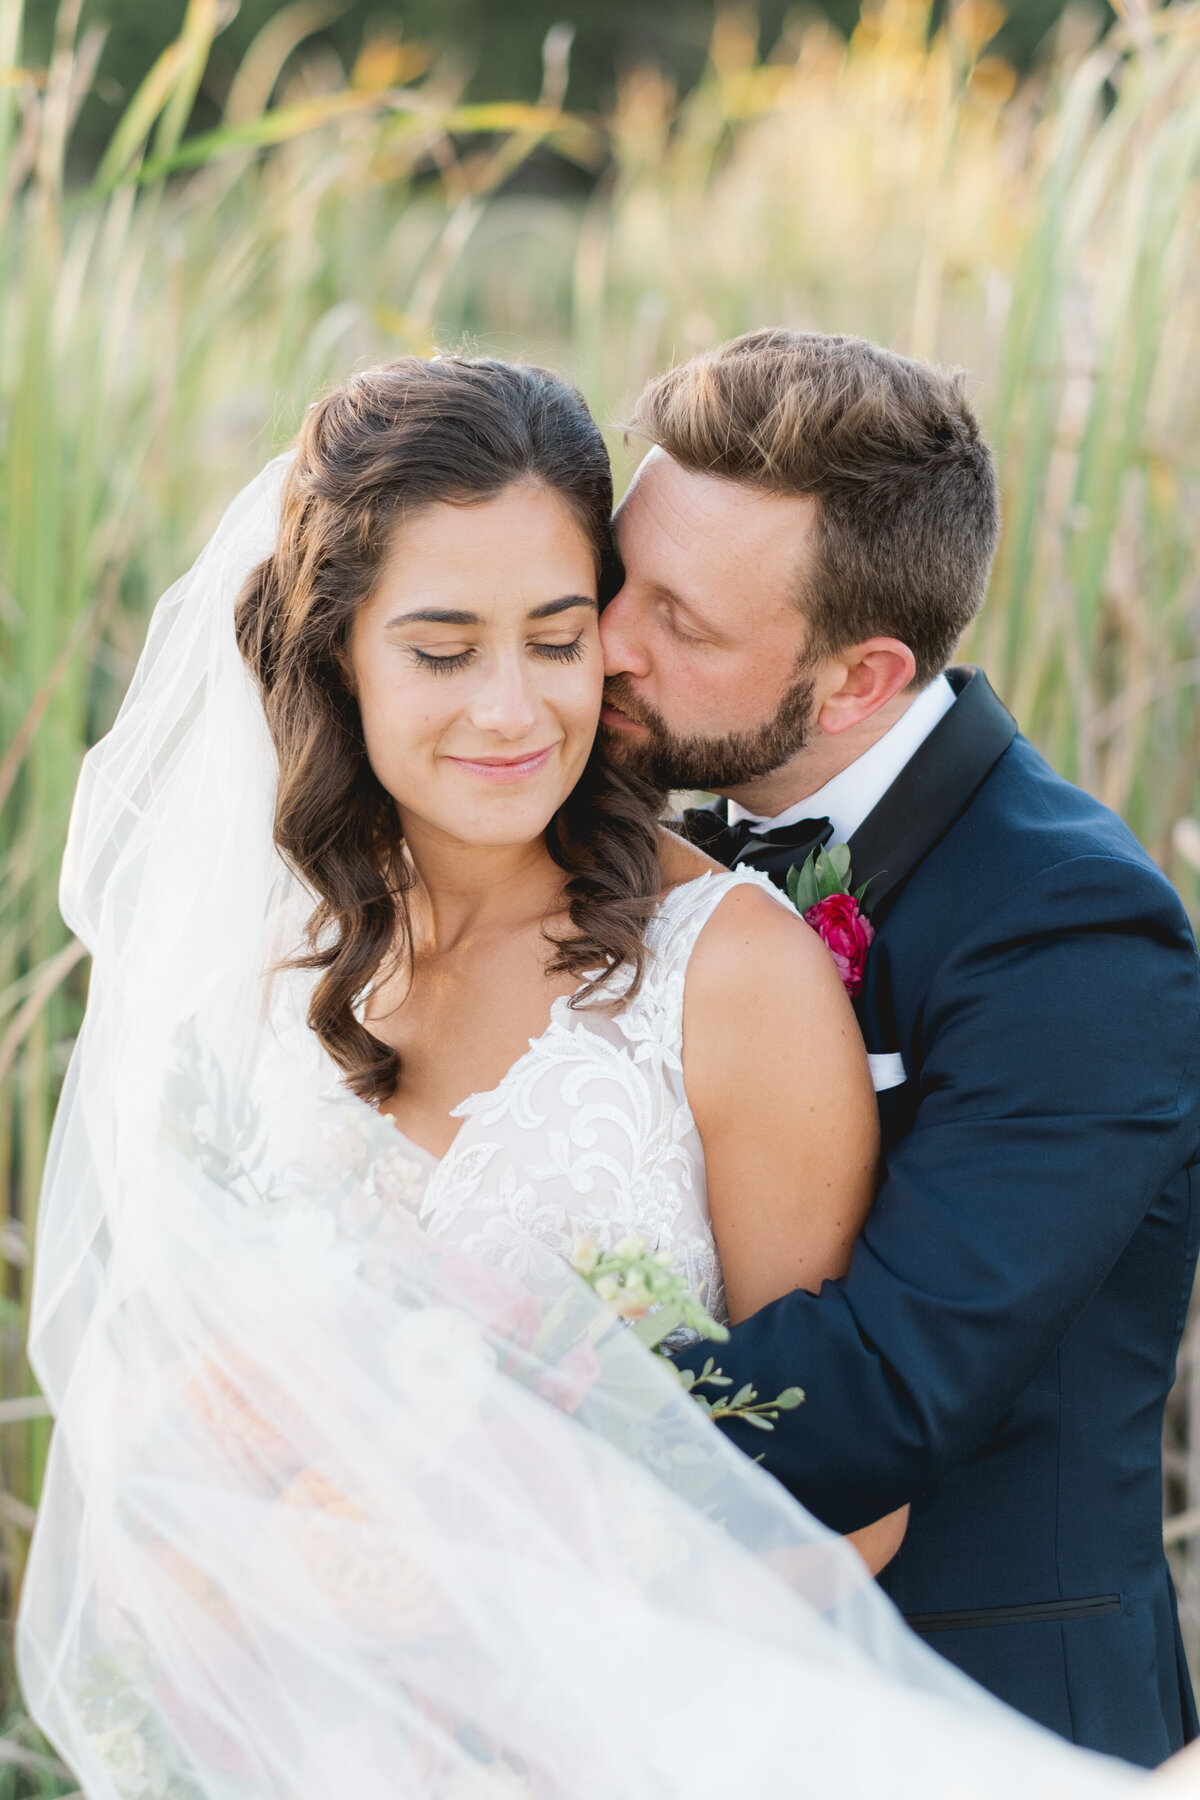 wedding couple in Pnina Tornei gown and navy tuxedo hugging on wedding day